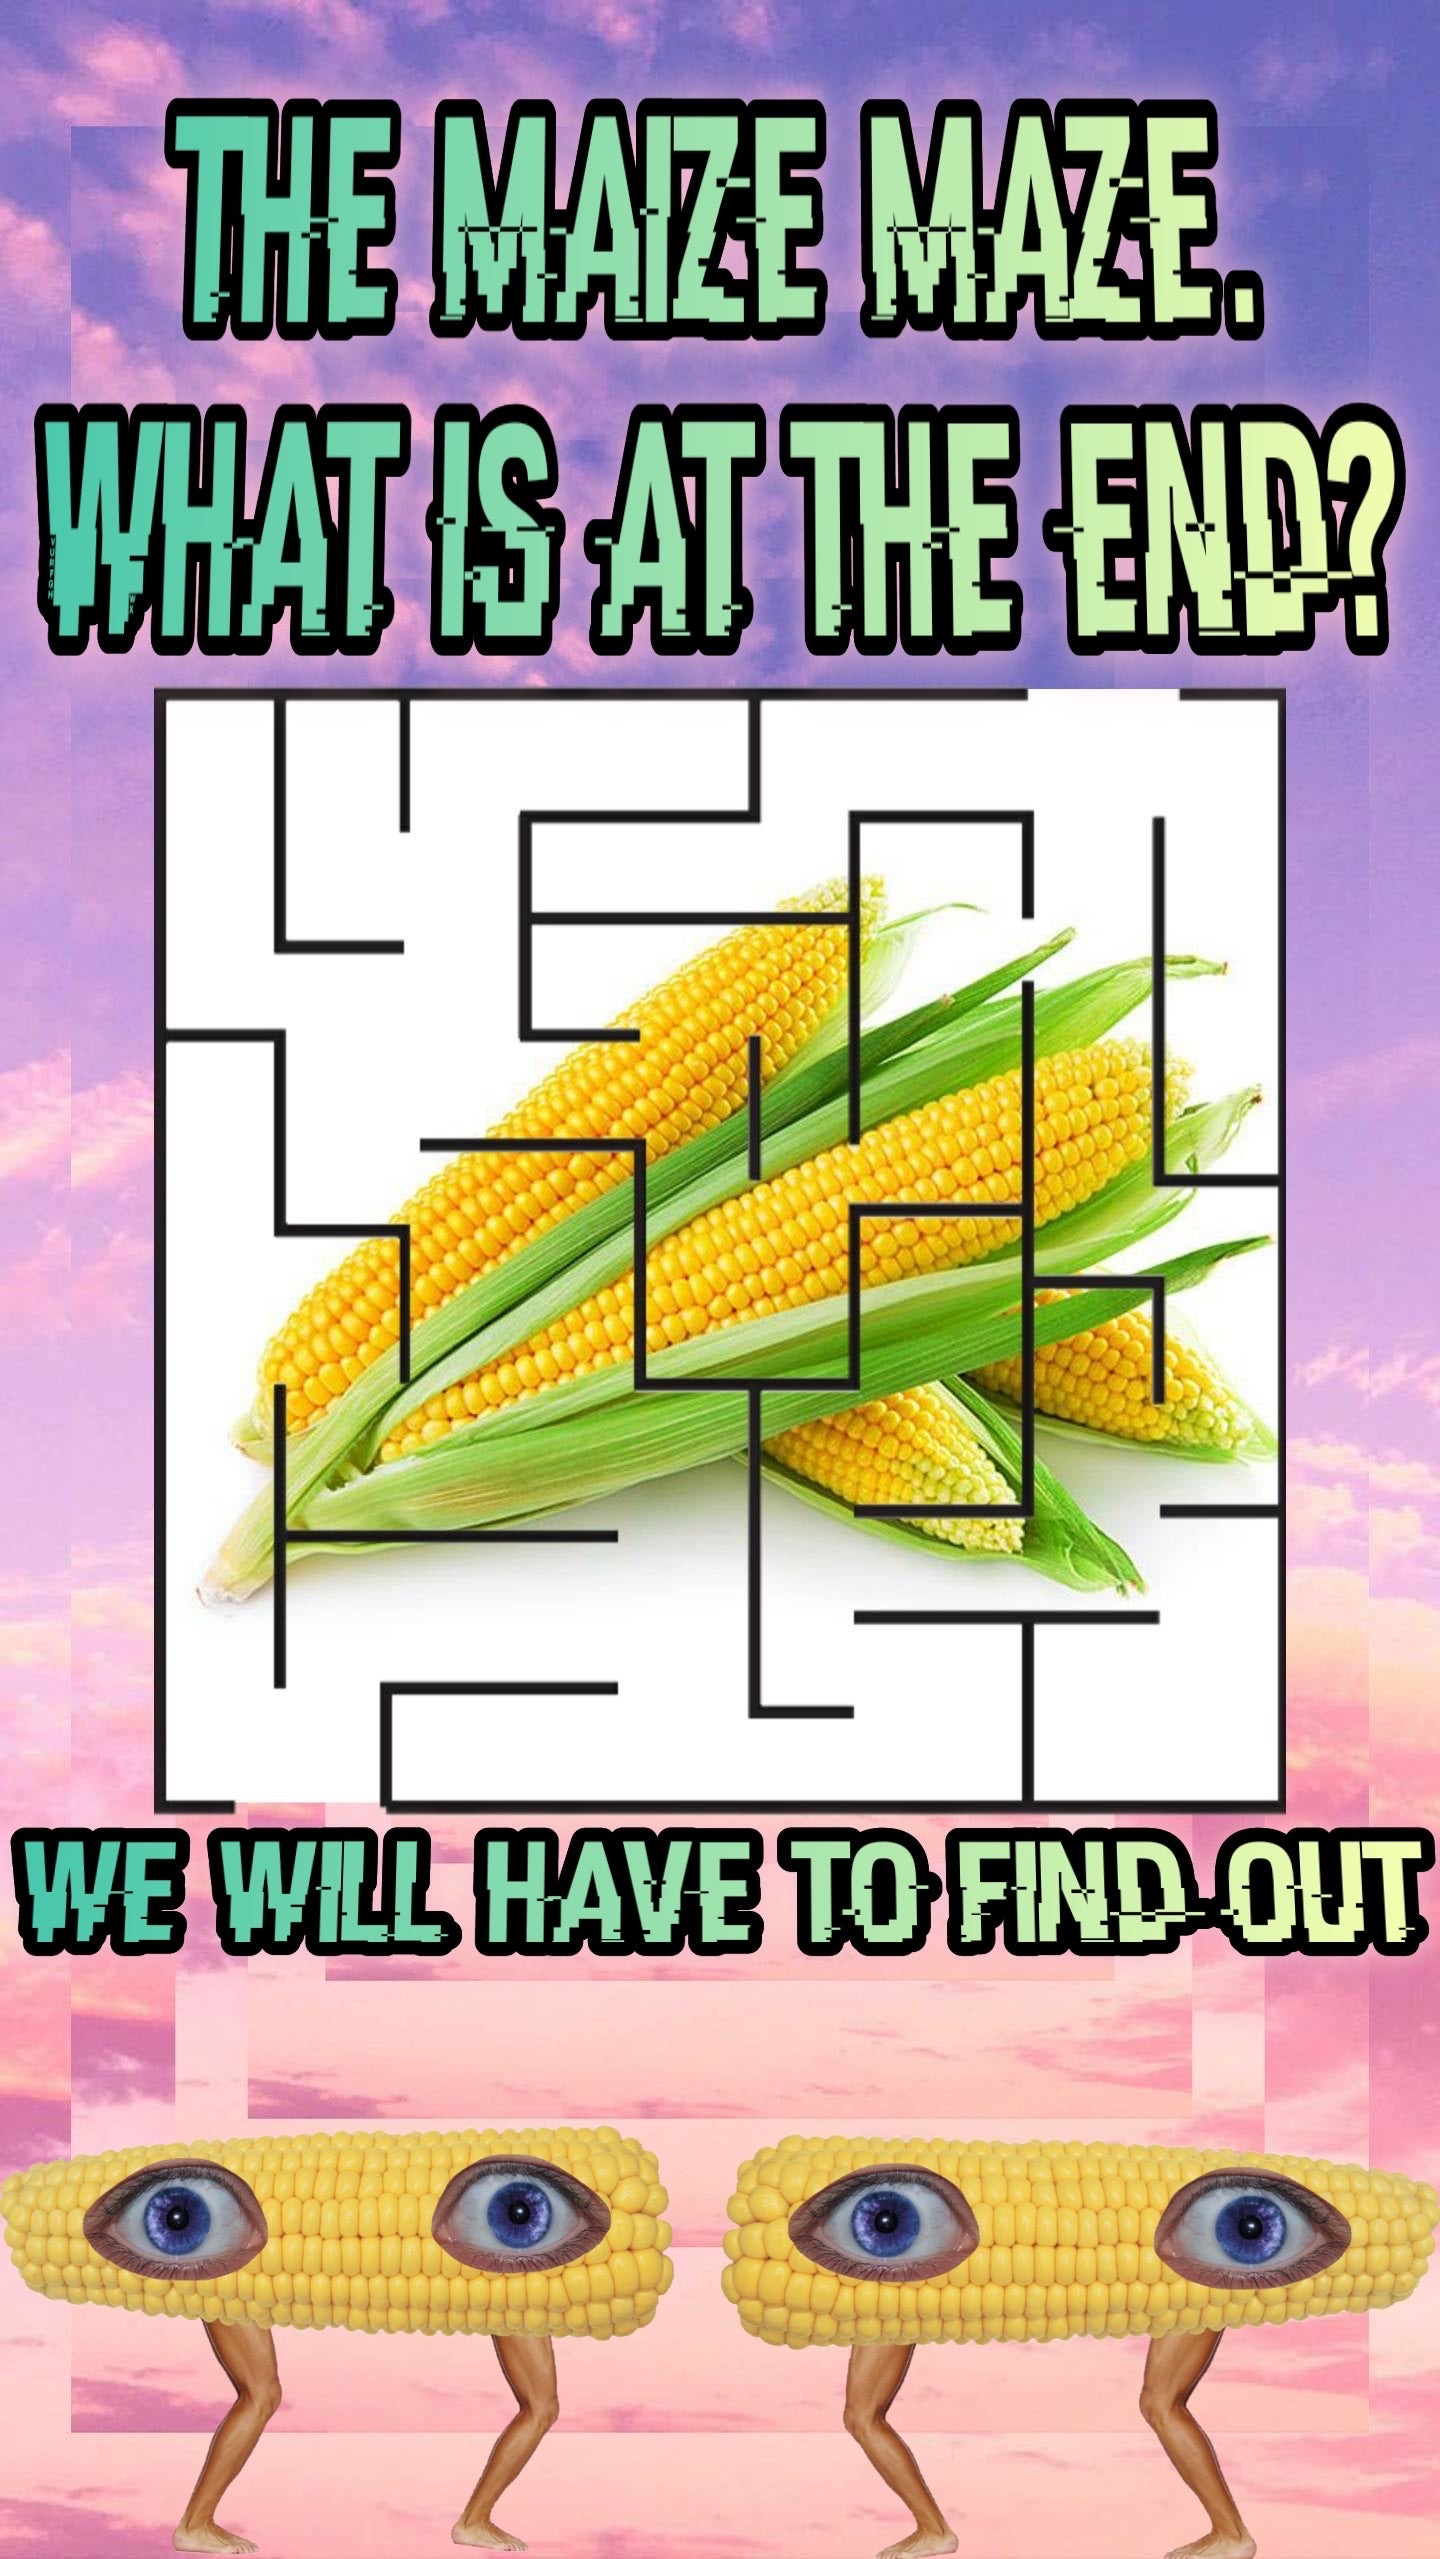 surreal memes - cartoon - The Maze Maze. What Is At The End? We Will Have To Find Out